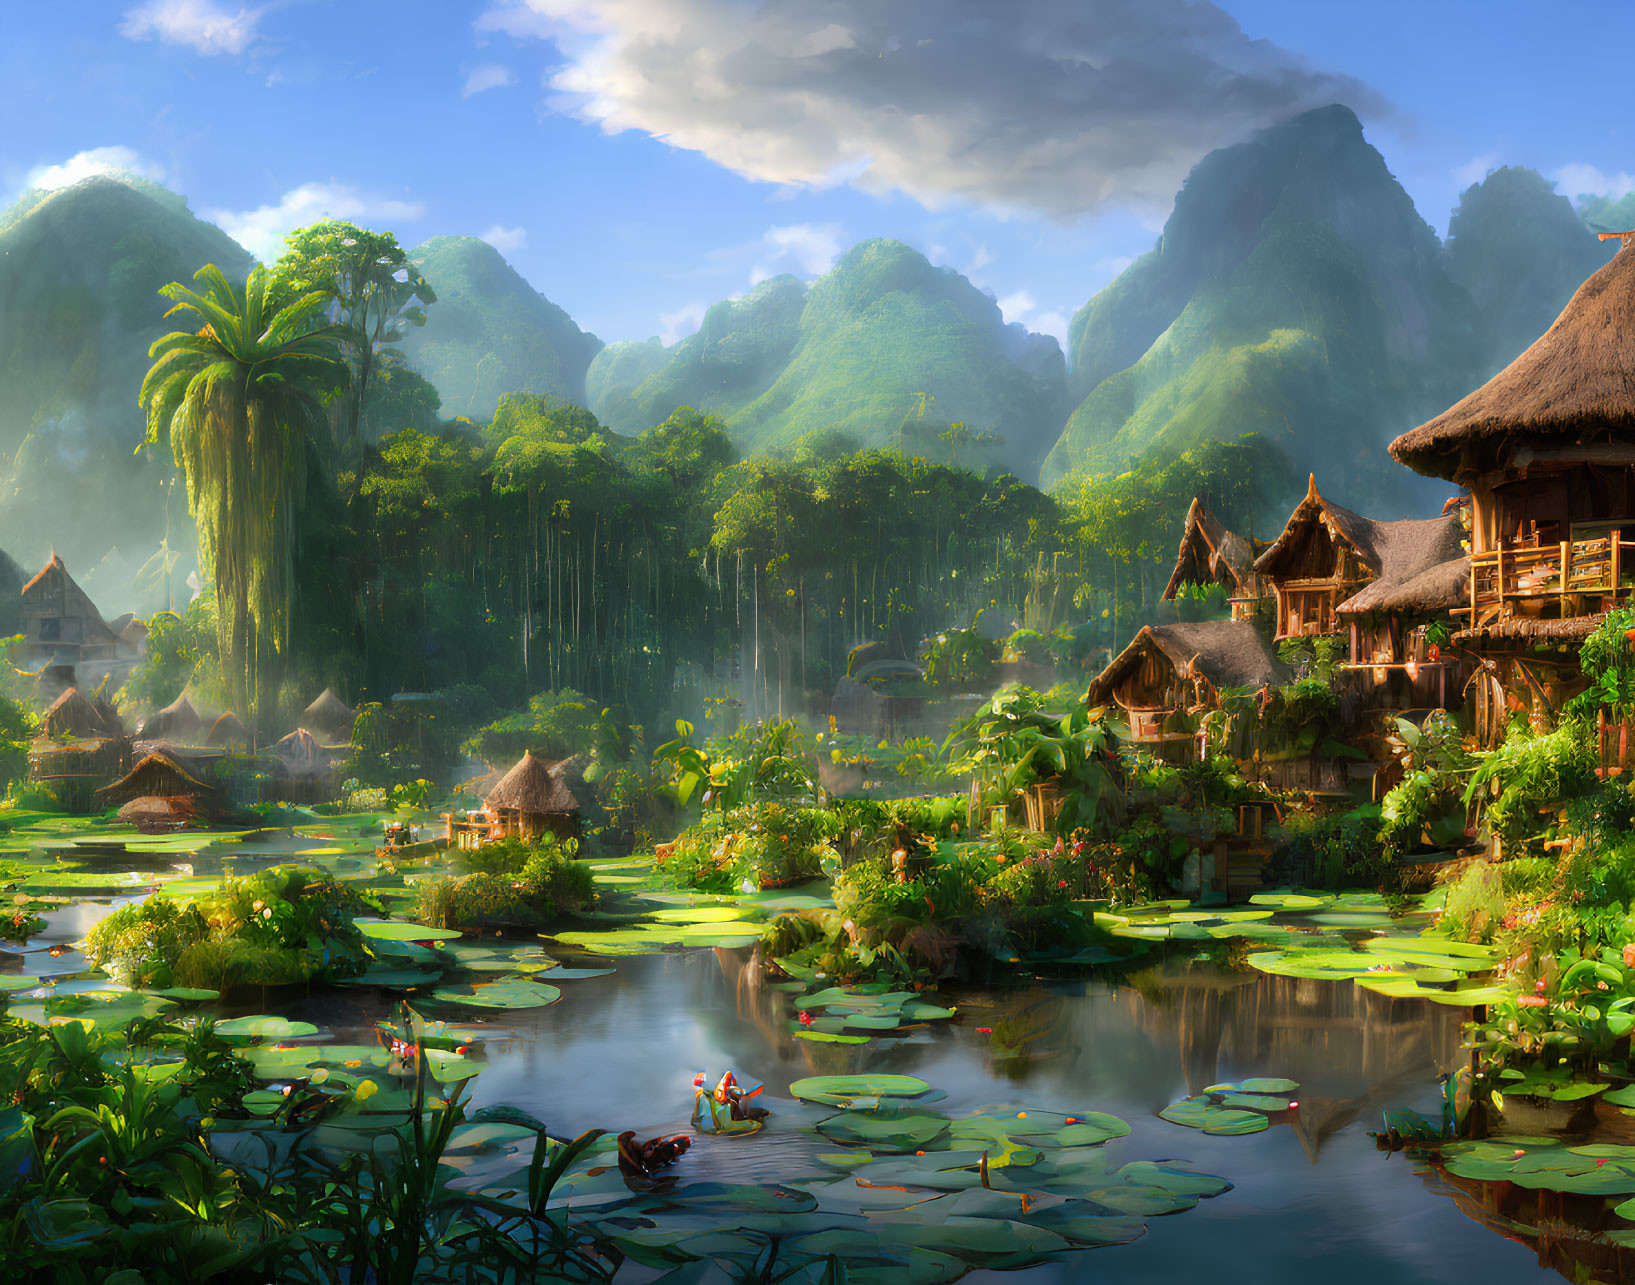 Tranquil landscape with thatched-roof houses, lush mountains, river, and boat.